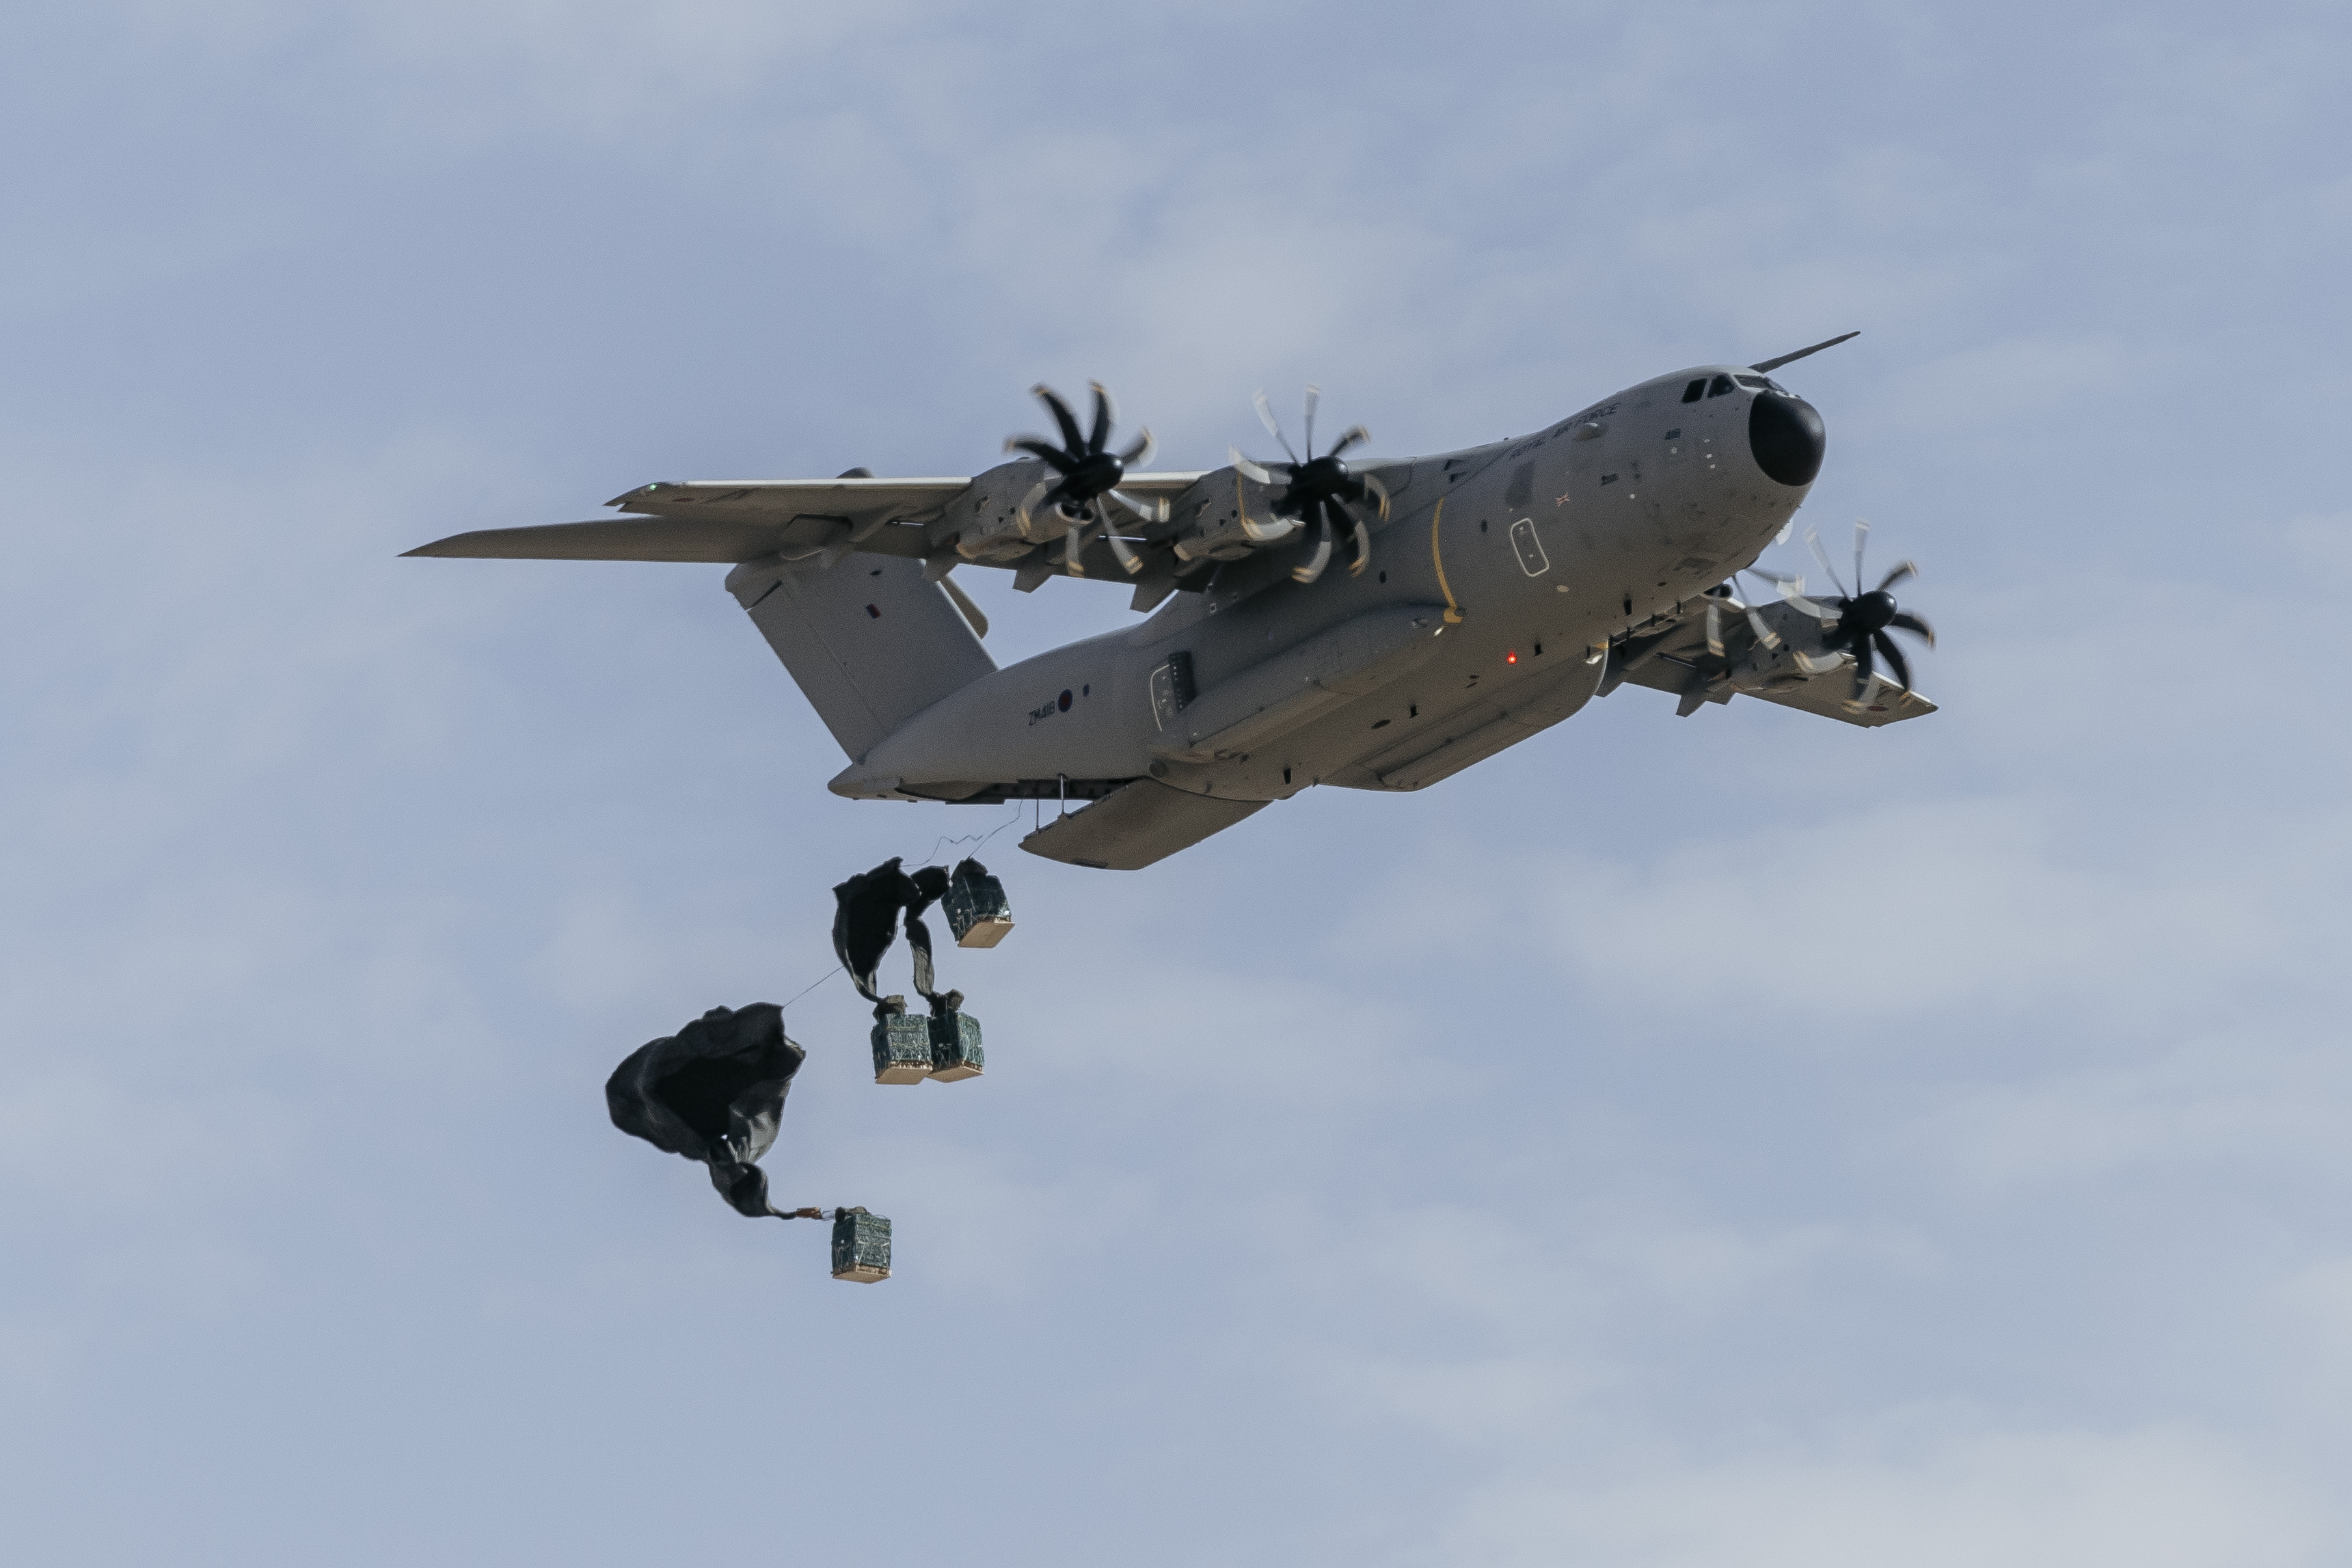 Image shows RAF Altas dropping cargo from loading bay, as they deploy parachutes.